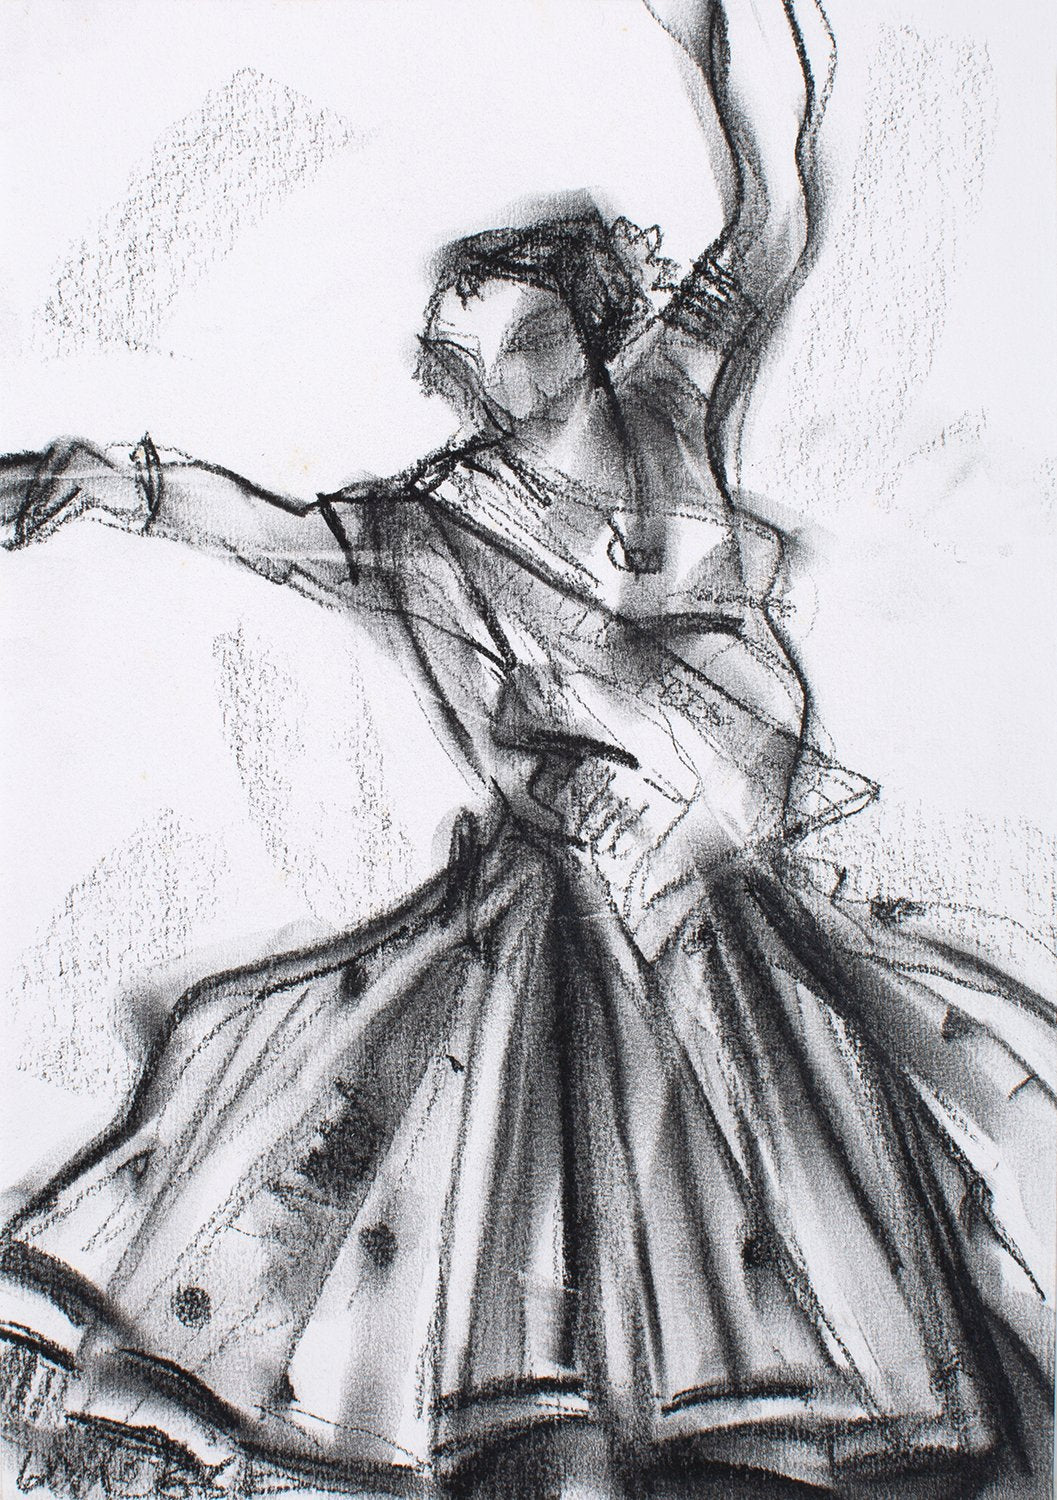 Performer 139|S. Mark Rathinaraj- Charcoal on Board, , 11 x 8 inches